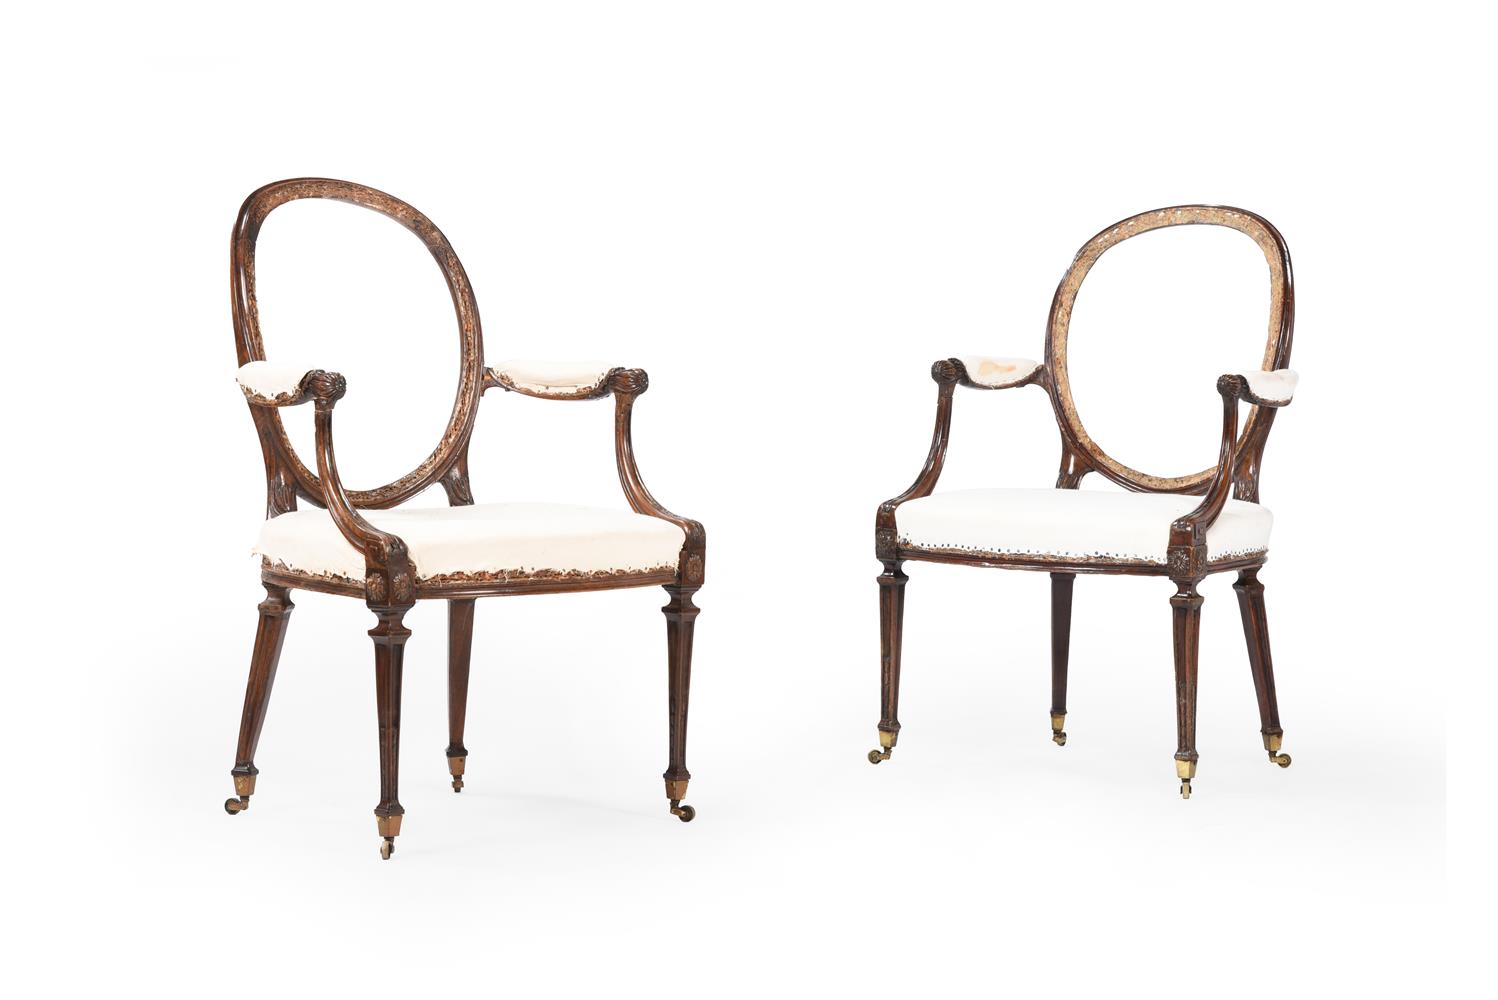 A PAIR OF GEORGE III BEECHWOOD ARMCHAIRSIN THE MANNER OF JOHN LINNELL